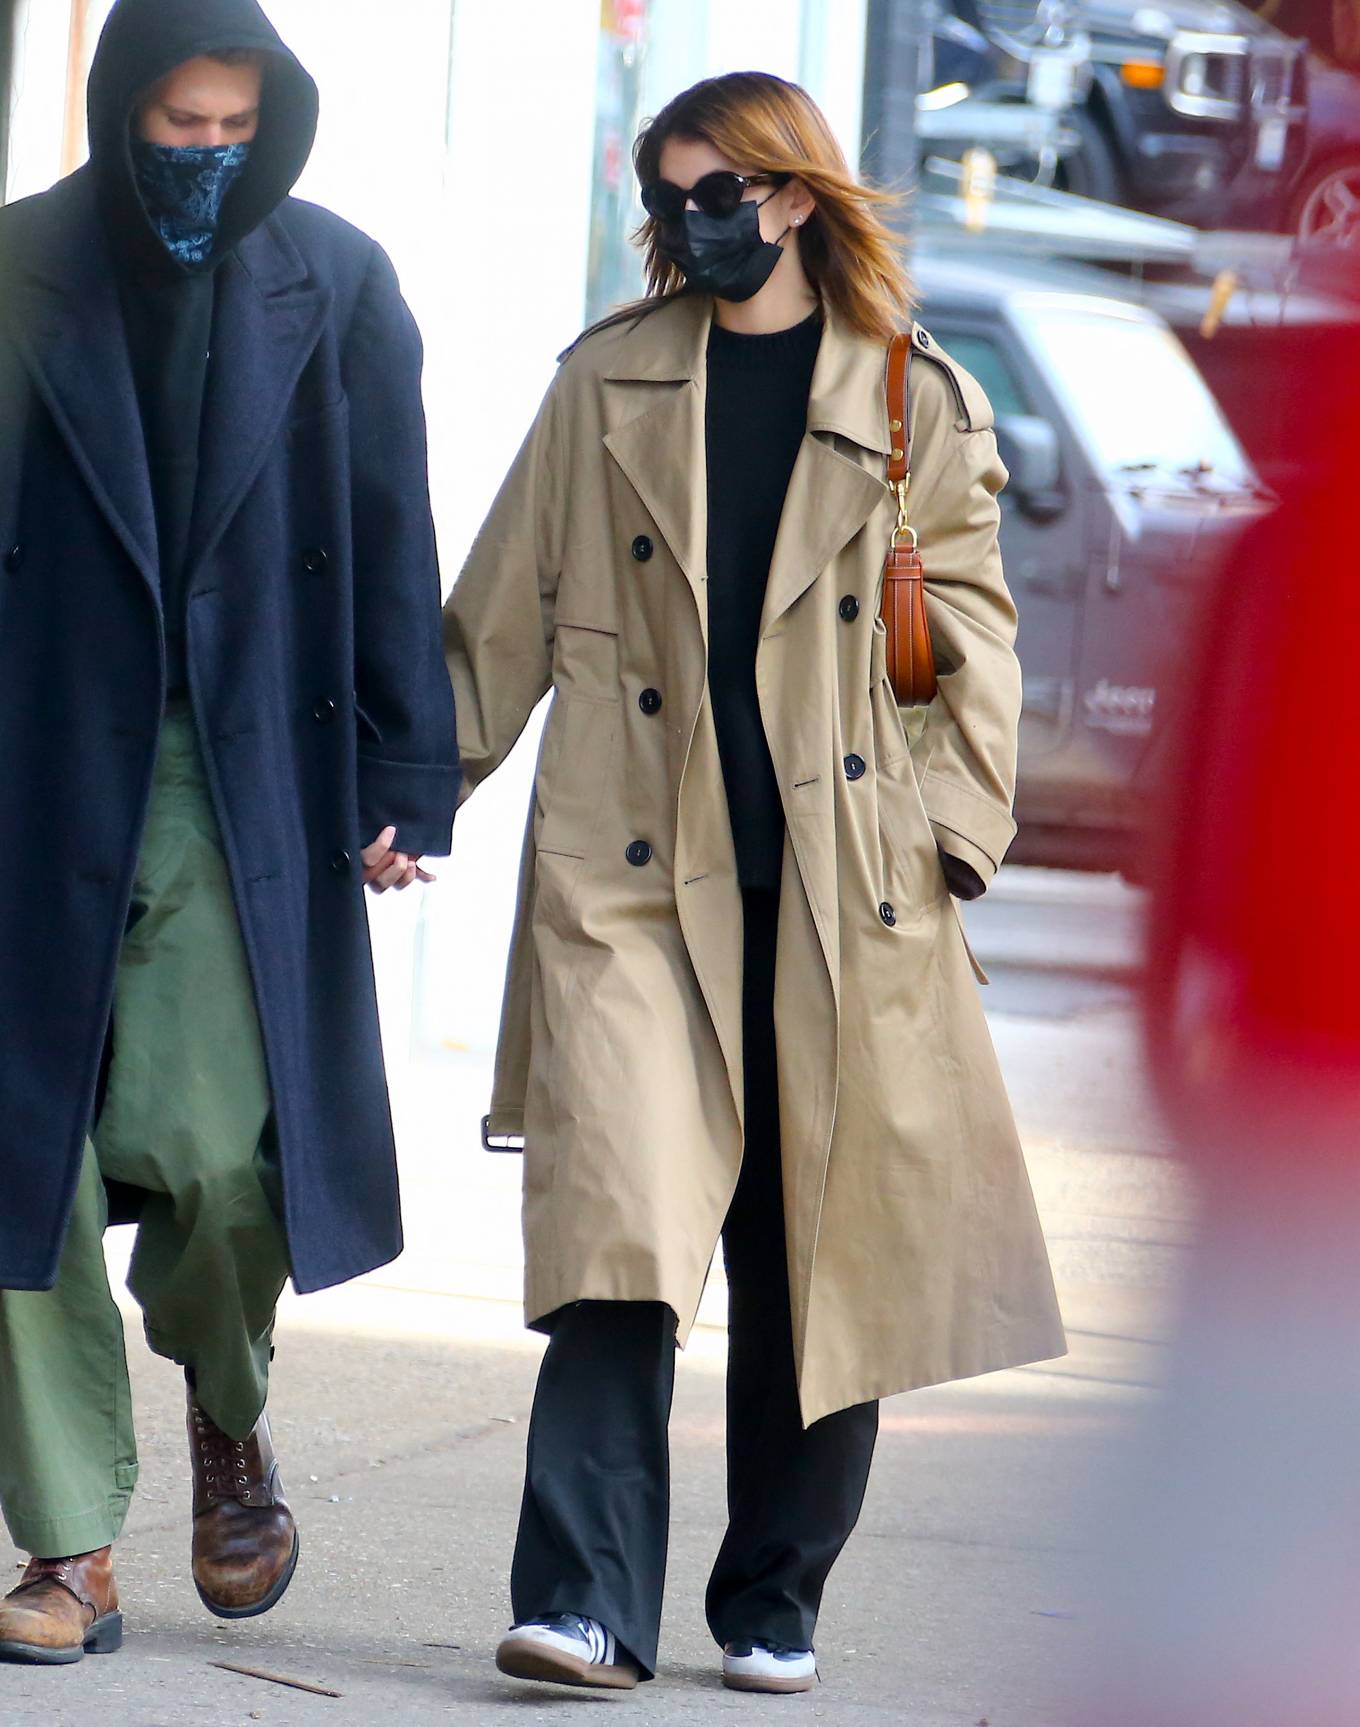 Kaia Gerber - With actor Austin Butler seen shopping at Juice Generation in Soho